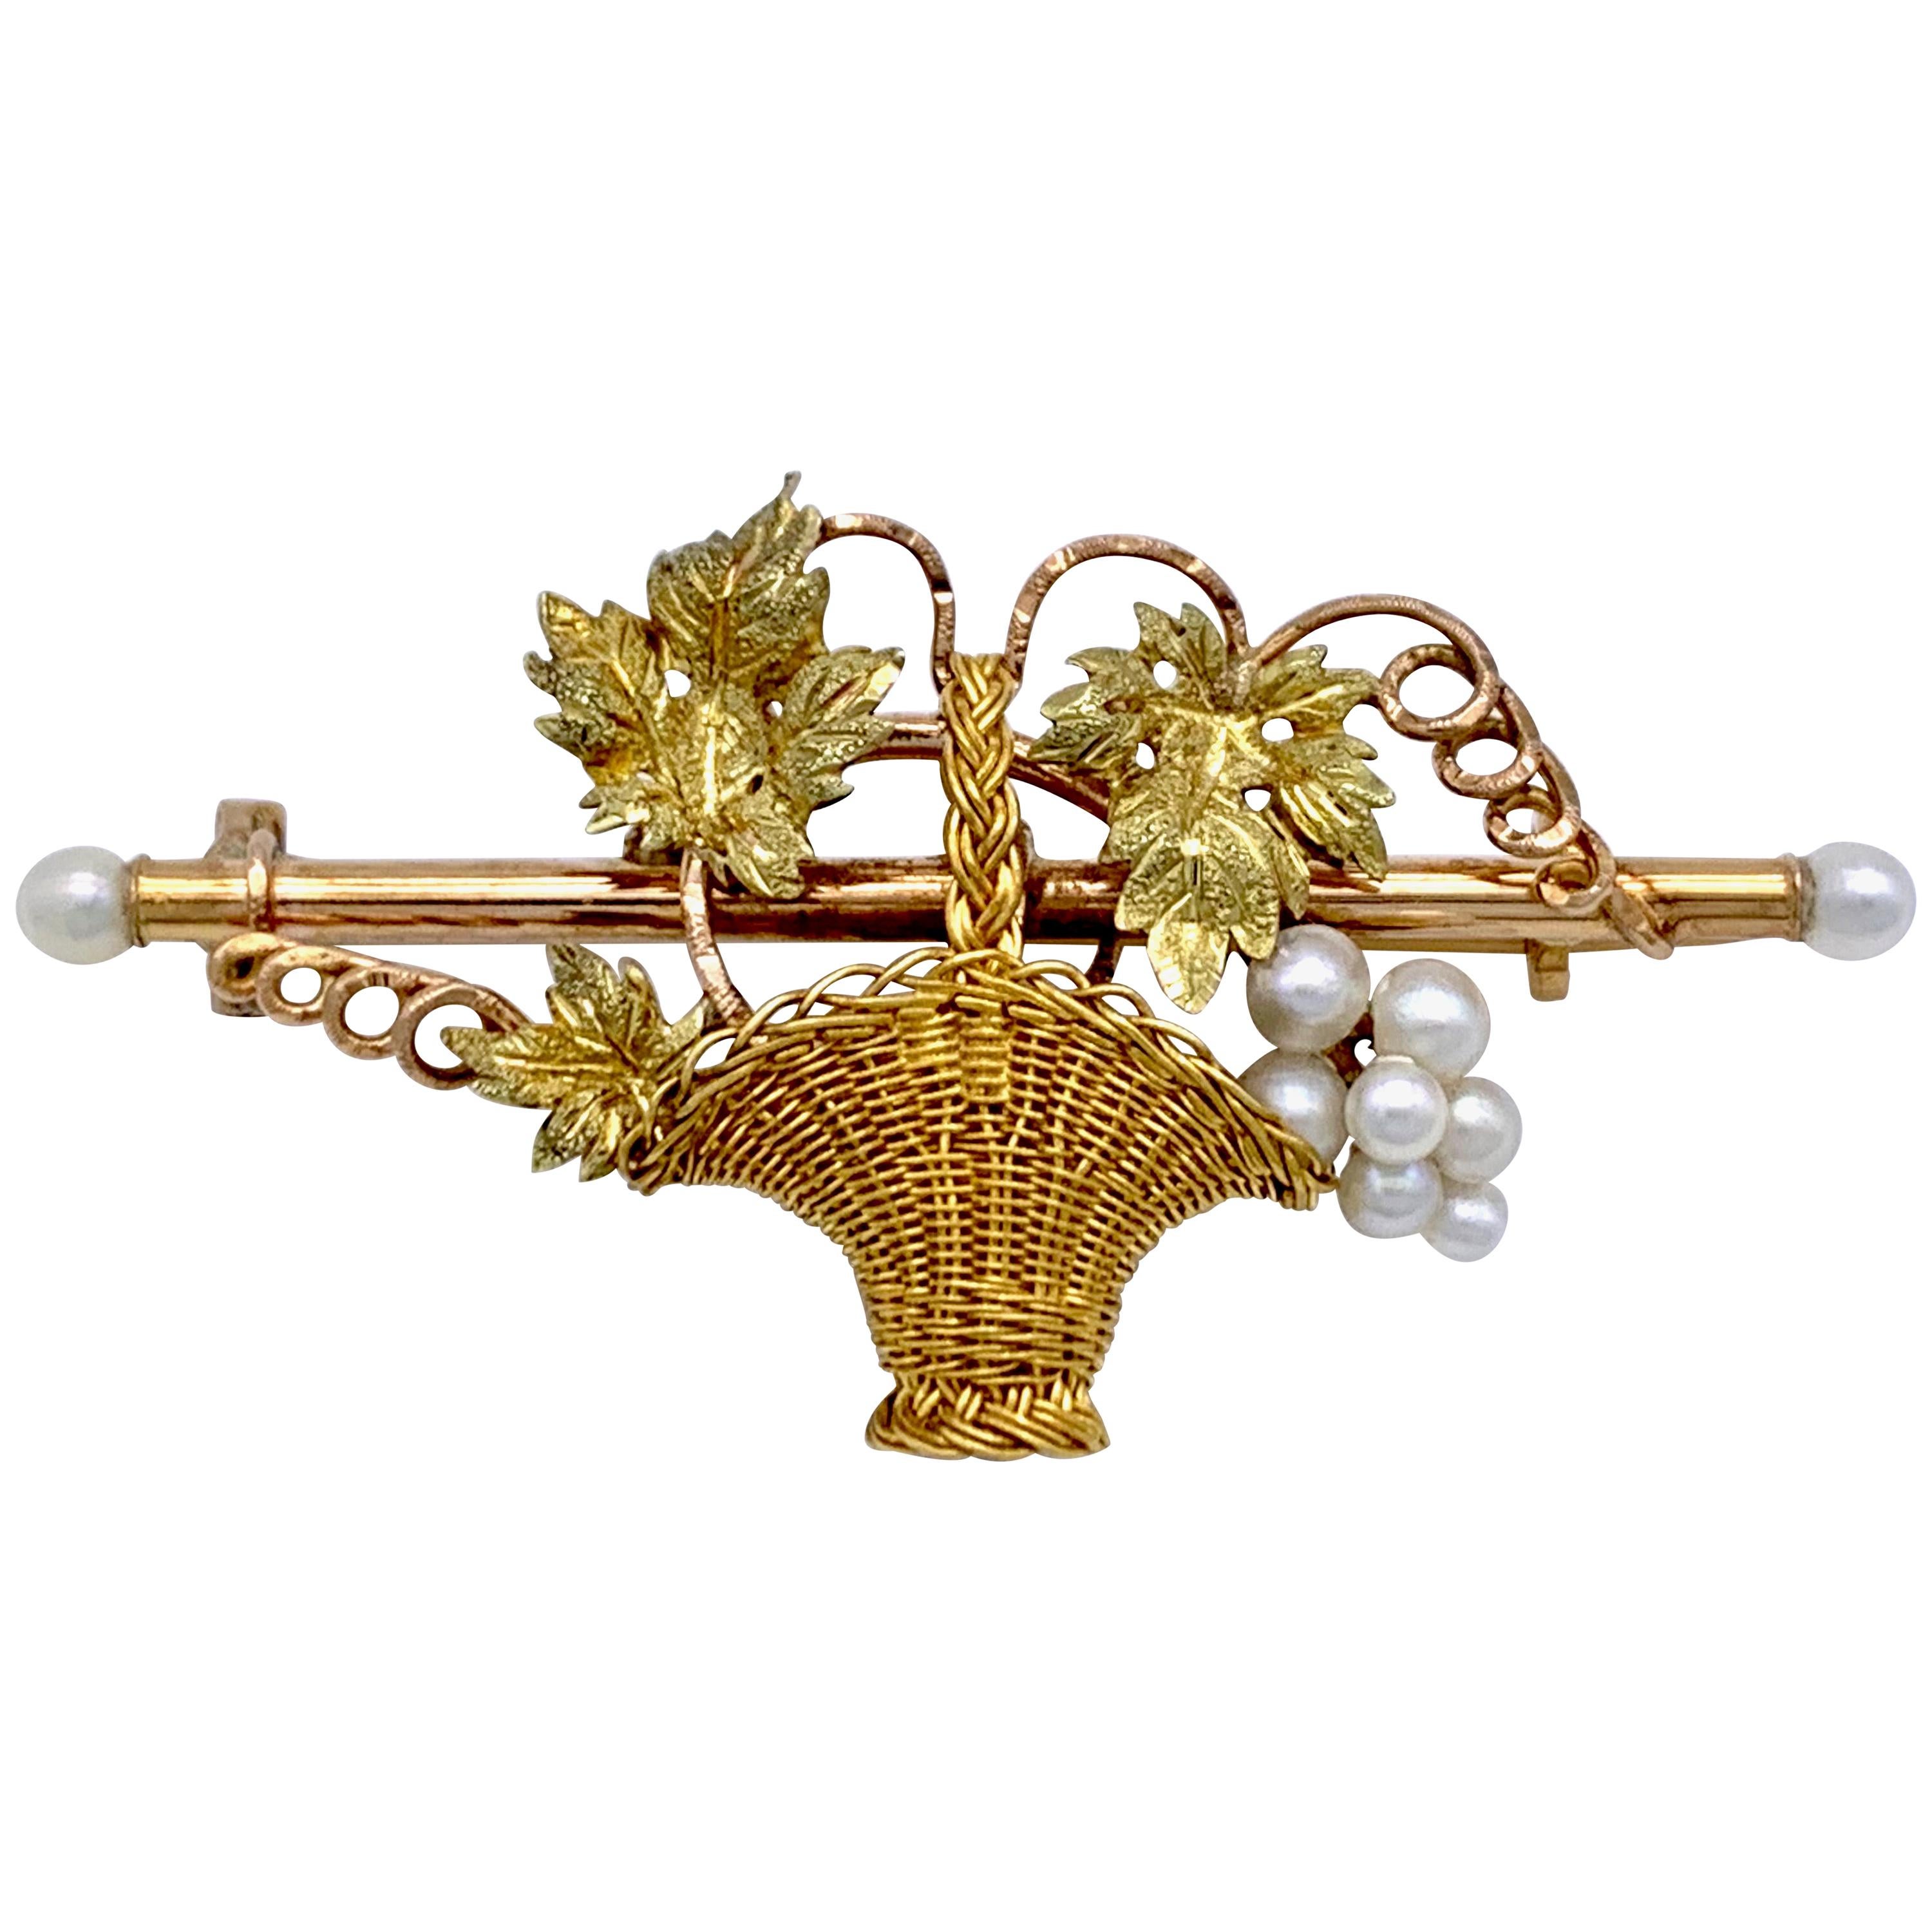 French 18 Karat Three Color Gold Pearls Grapes Vine Braided Handle Basket Brooch